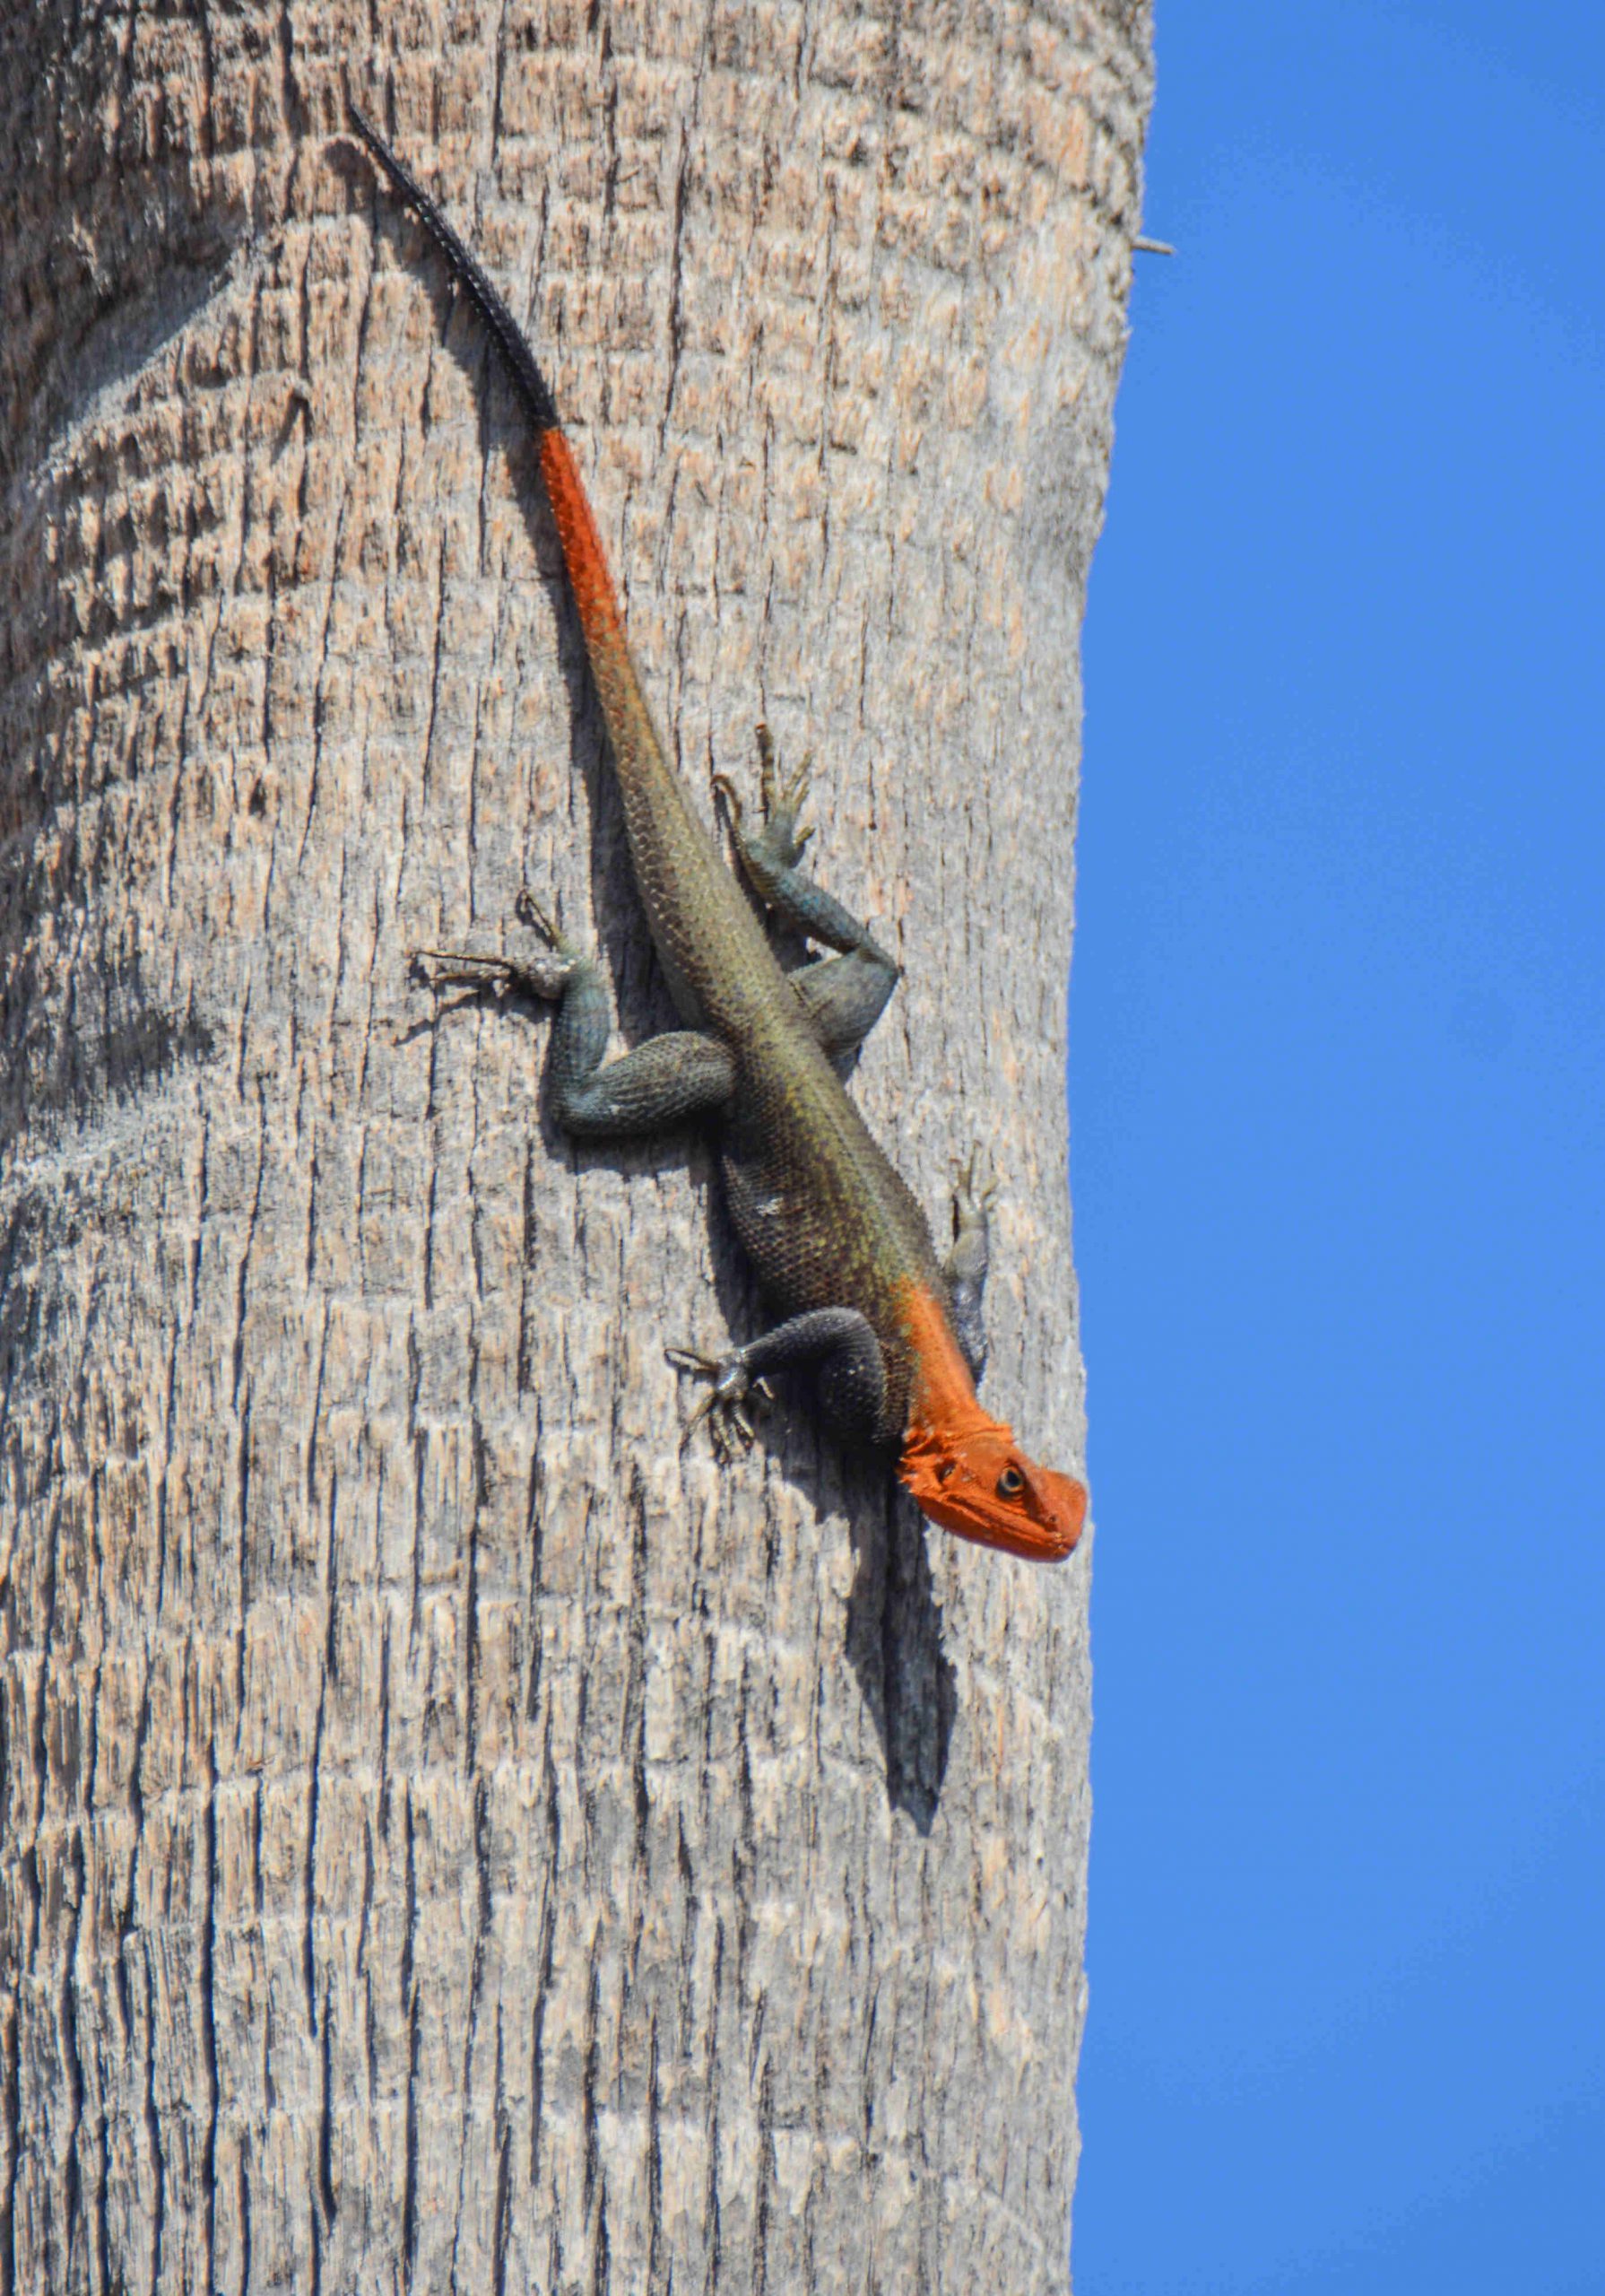 Male Peters's Rock Agama